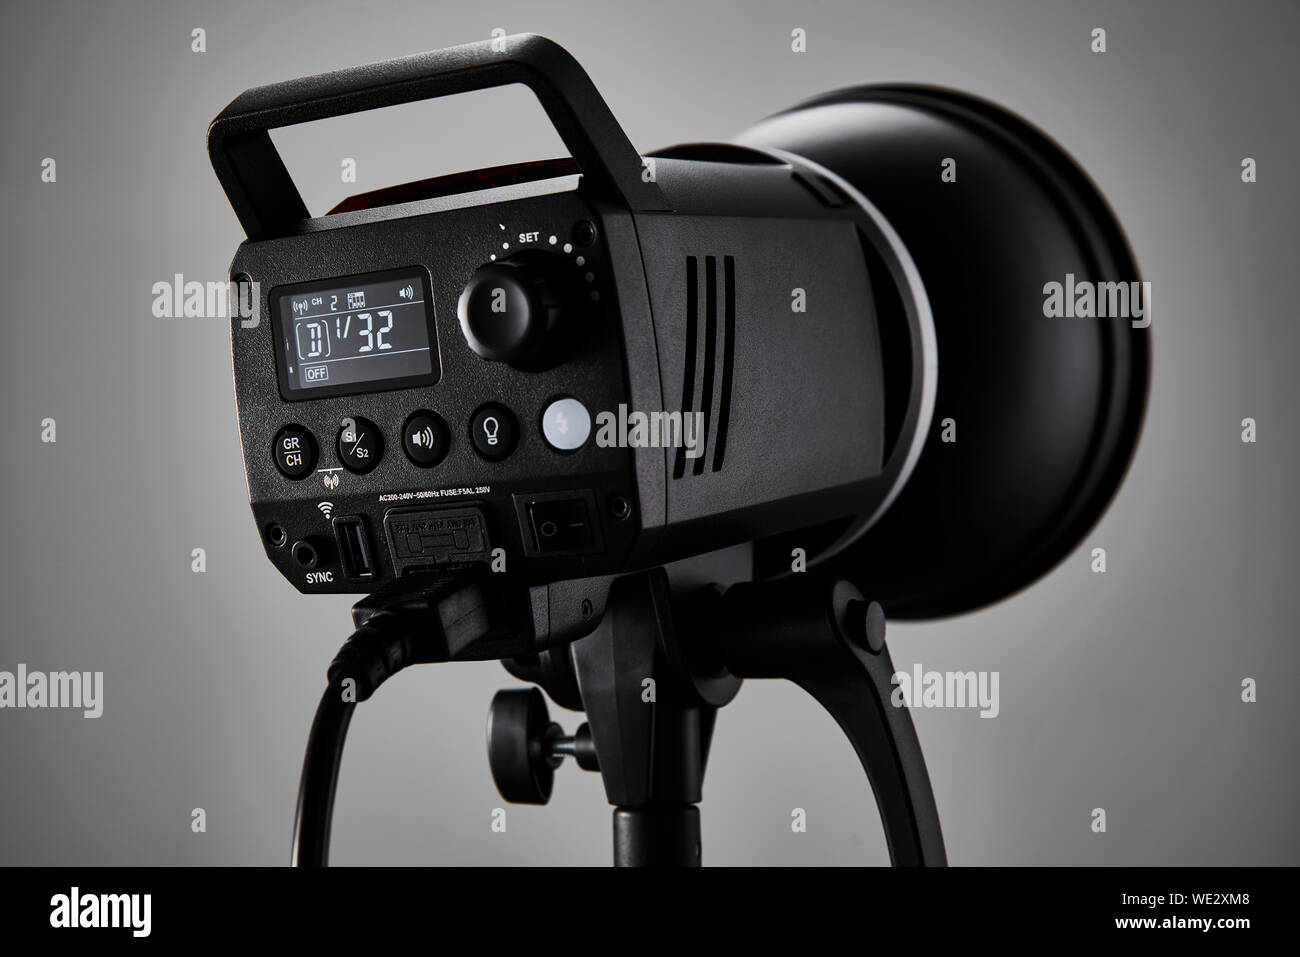 Brand new photography studio flash head turned on in a photo studio environment. Stock Photo